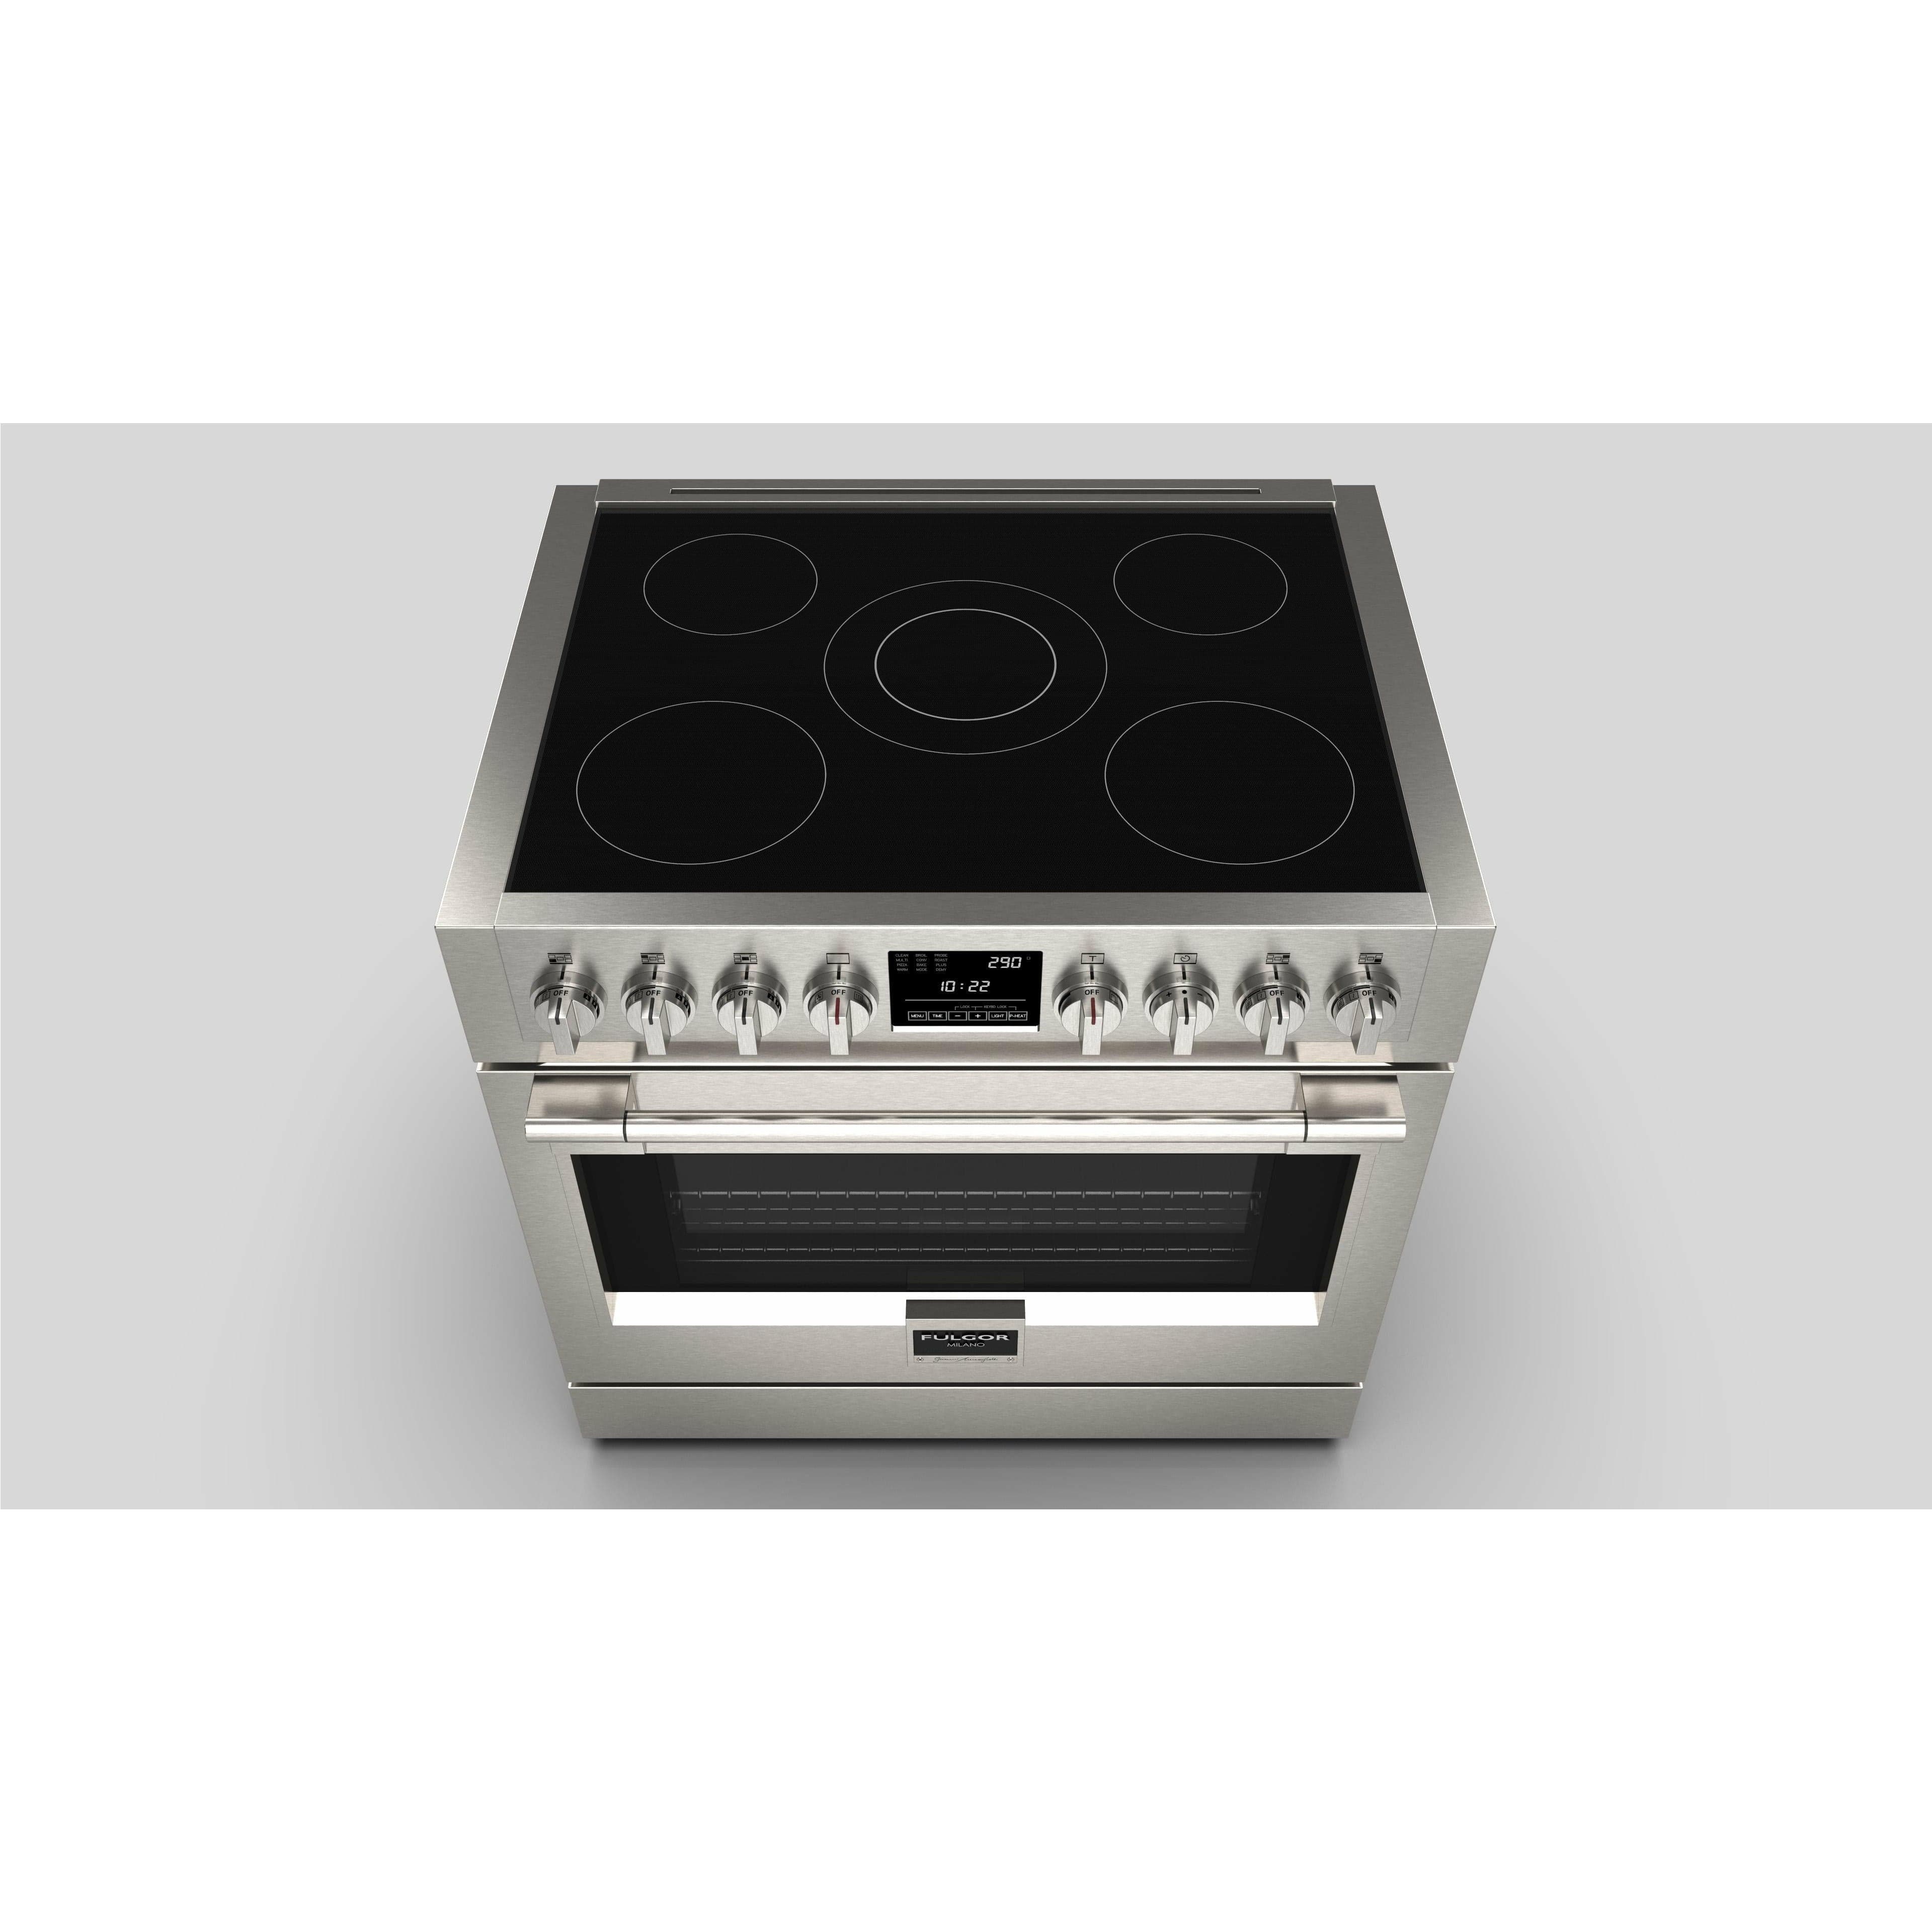 Fulgor Milano 36" Induction Freestanding Pro-Range with 5 Induction Zones, 5.7 Cu. Ft. Capacity - F6PIR365S1 Ranges Luxury Appliances Direct